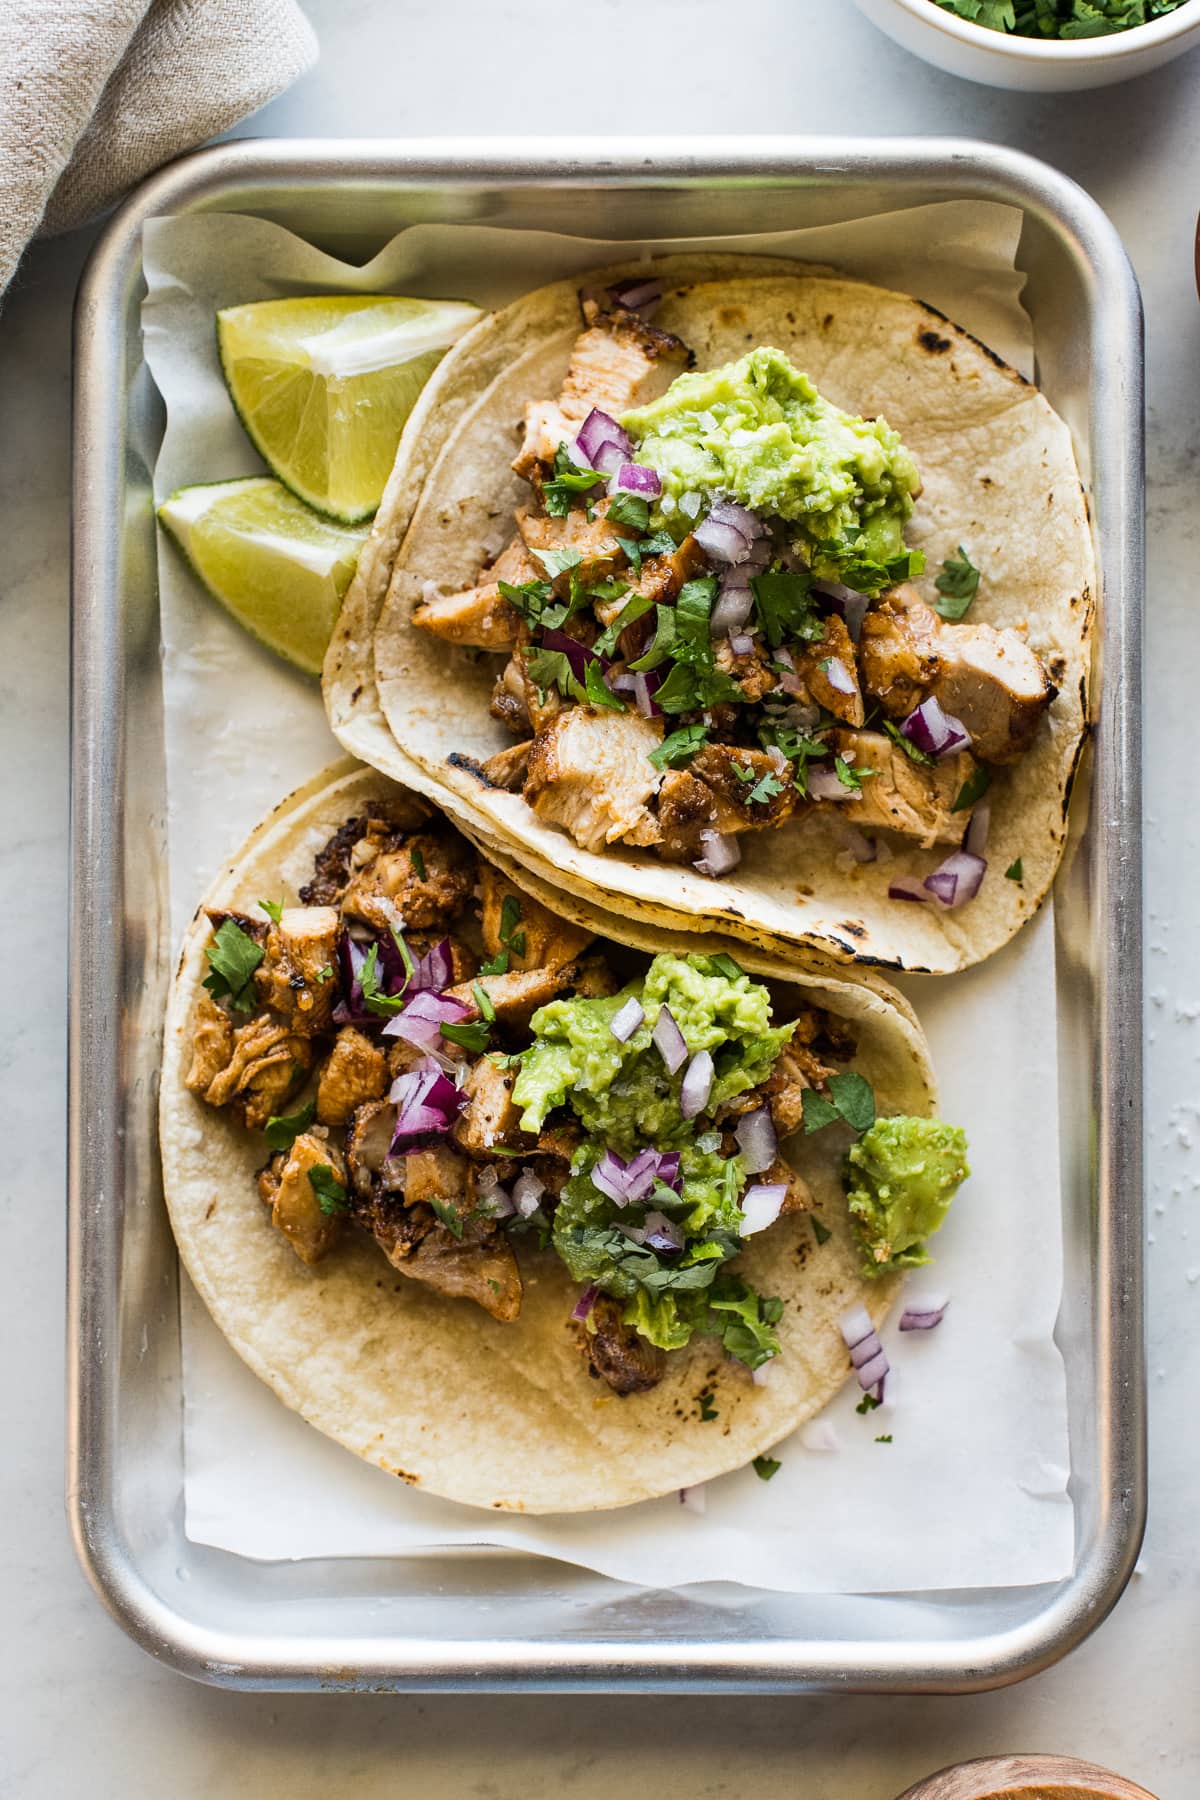 Easy chicken tacos recipe made with tender and juicy diced chicken and topped with avocado, onions, and lime juice.